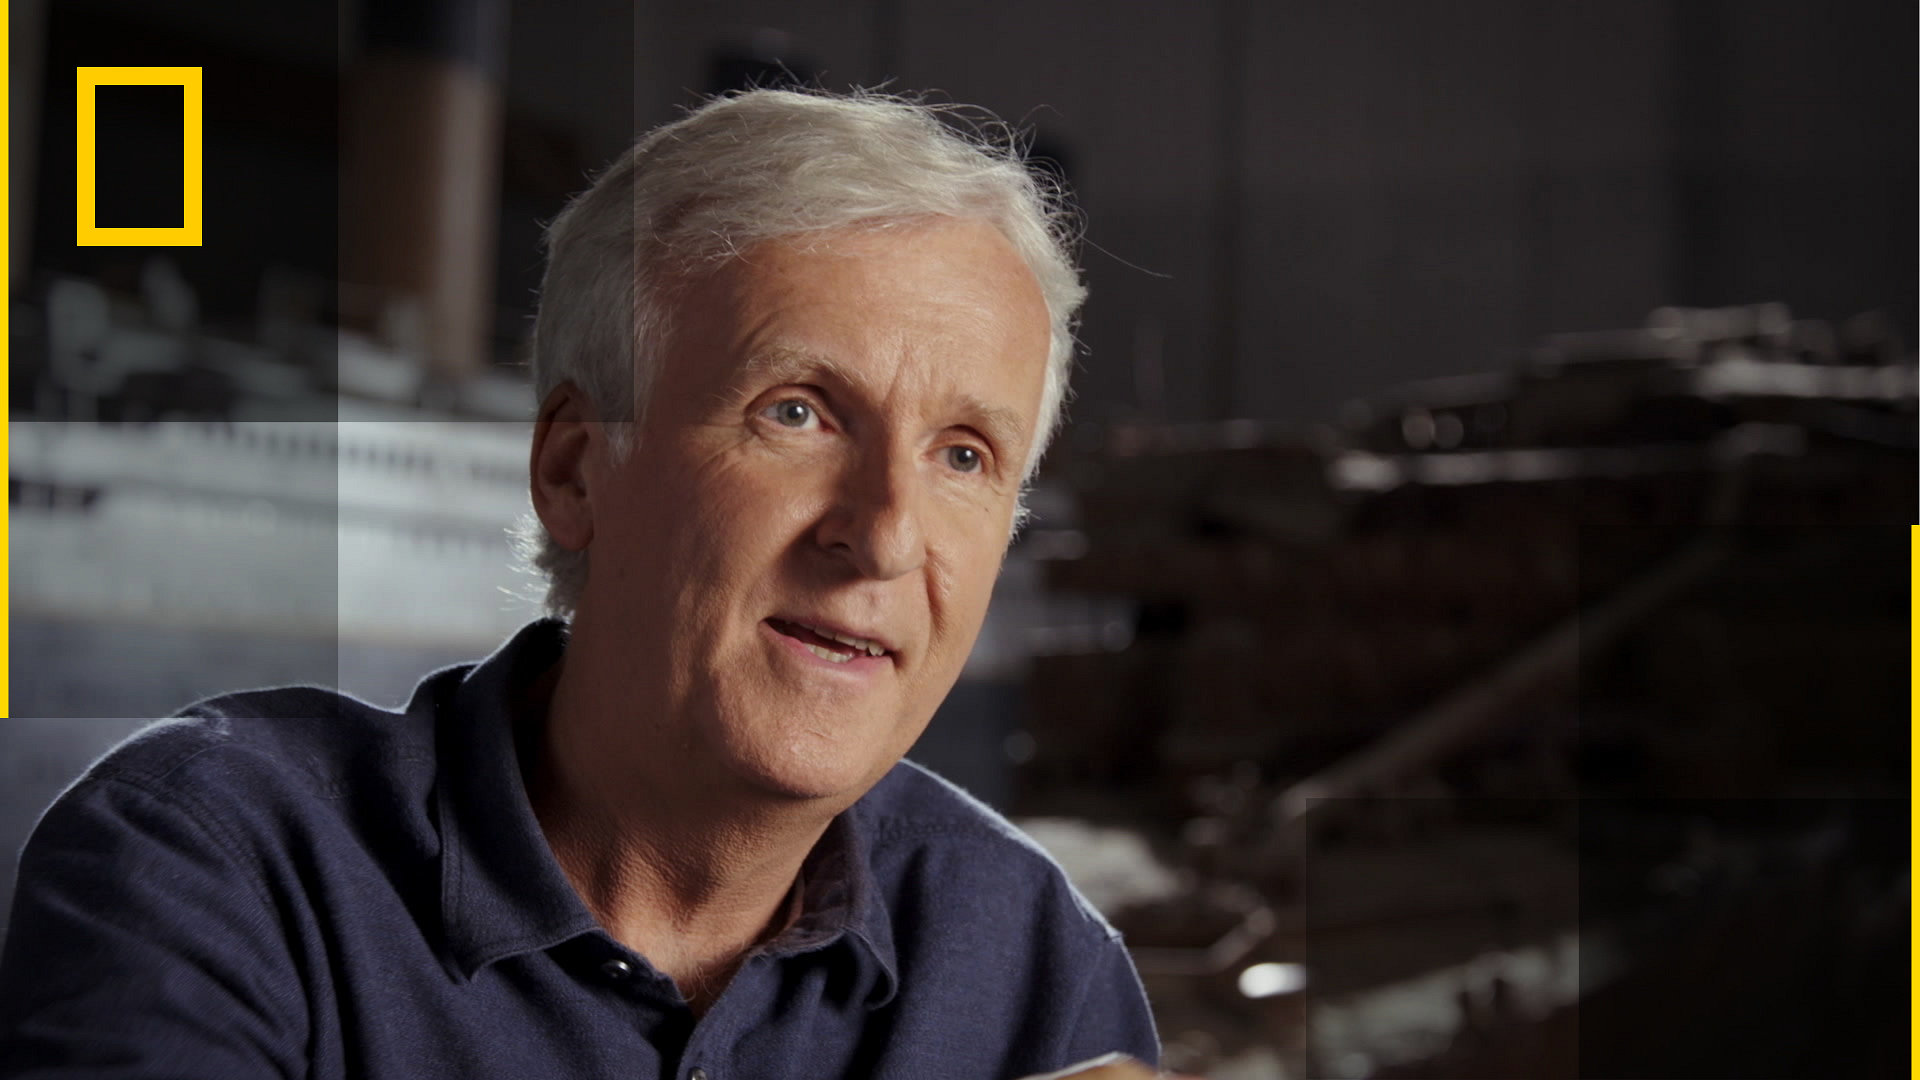 Titanic 25 Years Later with James Cameron